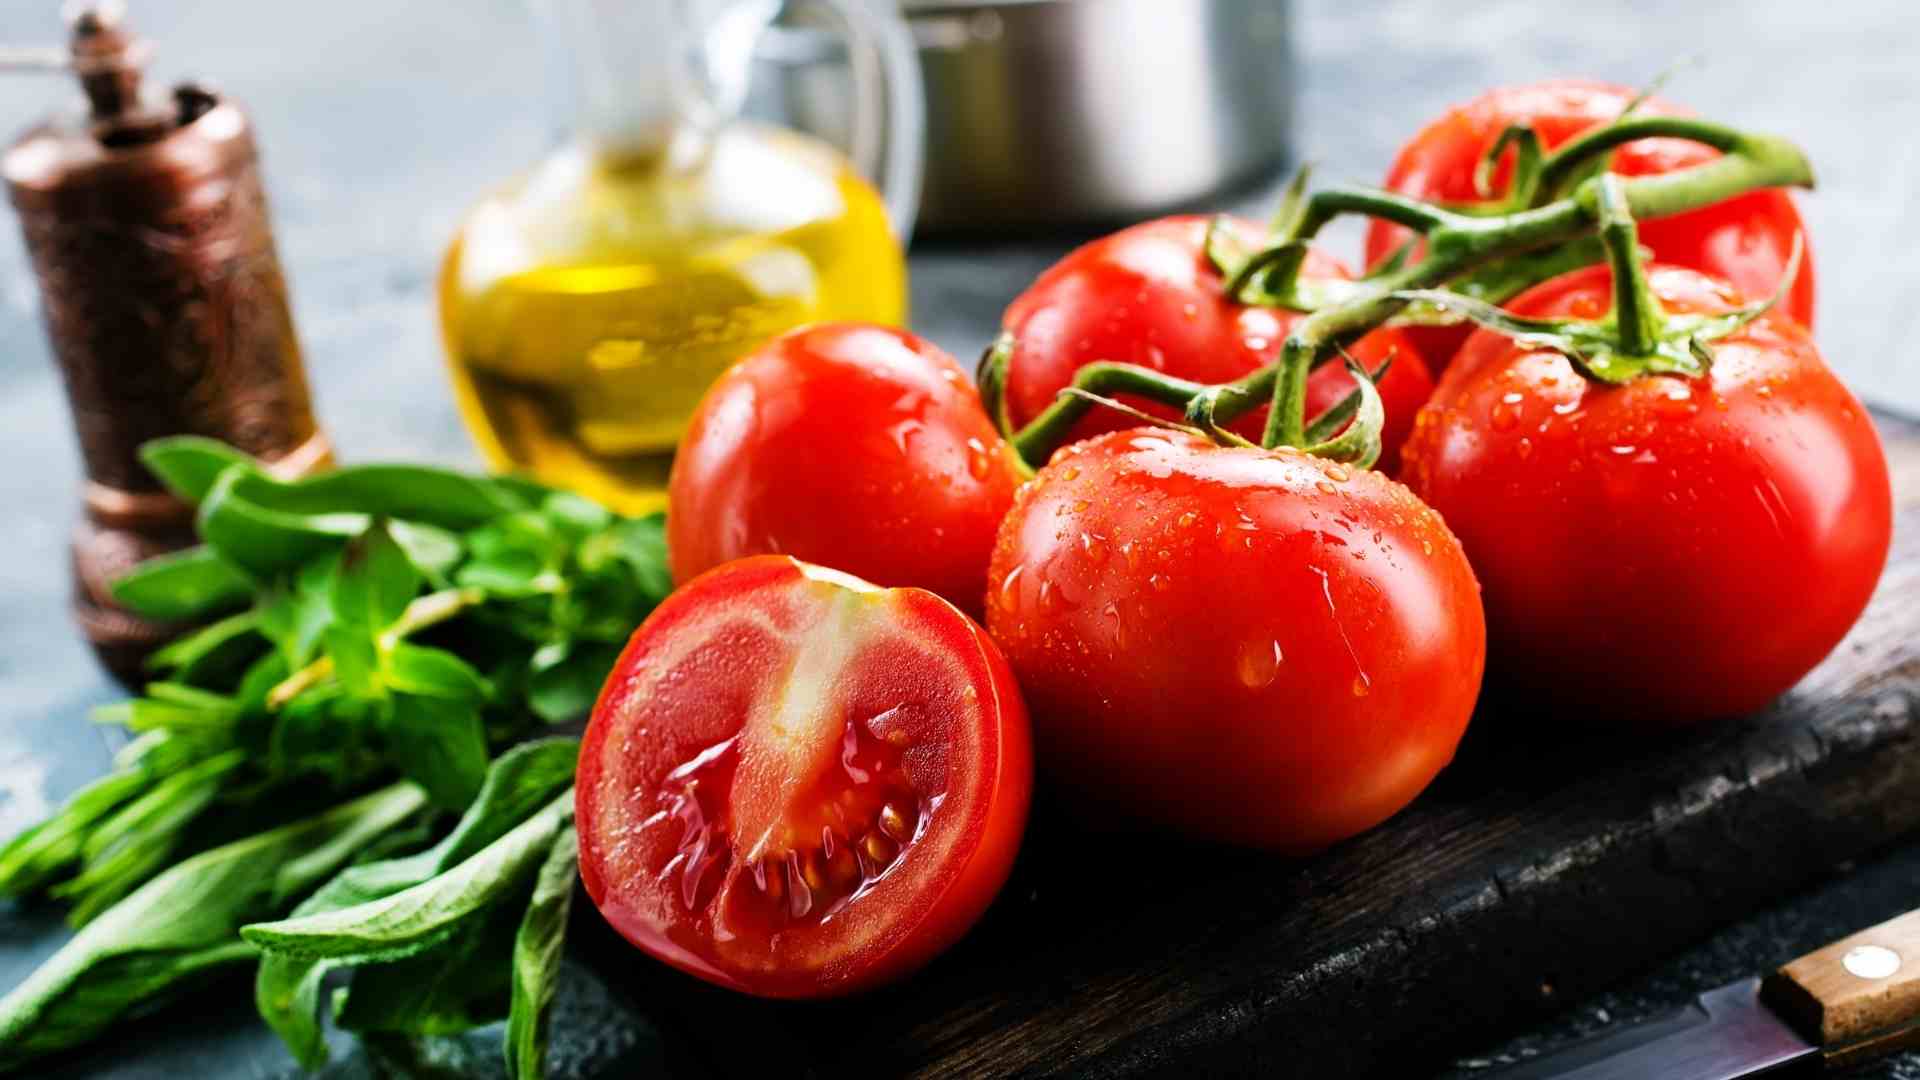 Benefits Of Tomatoes – 14 Reasons To Eat Tomatoes Every Day